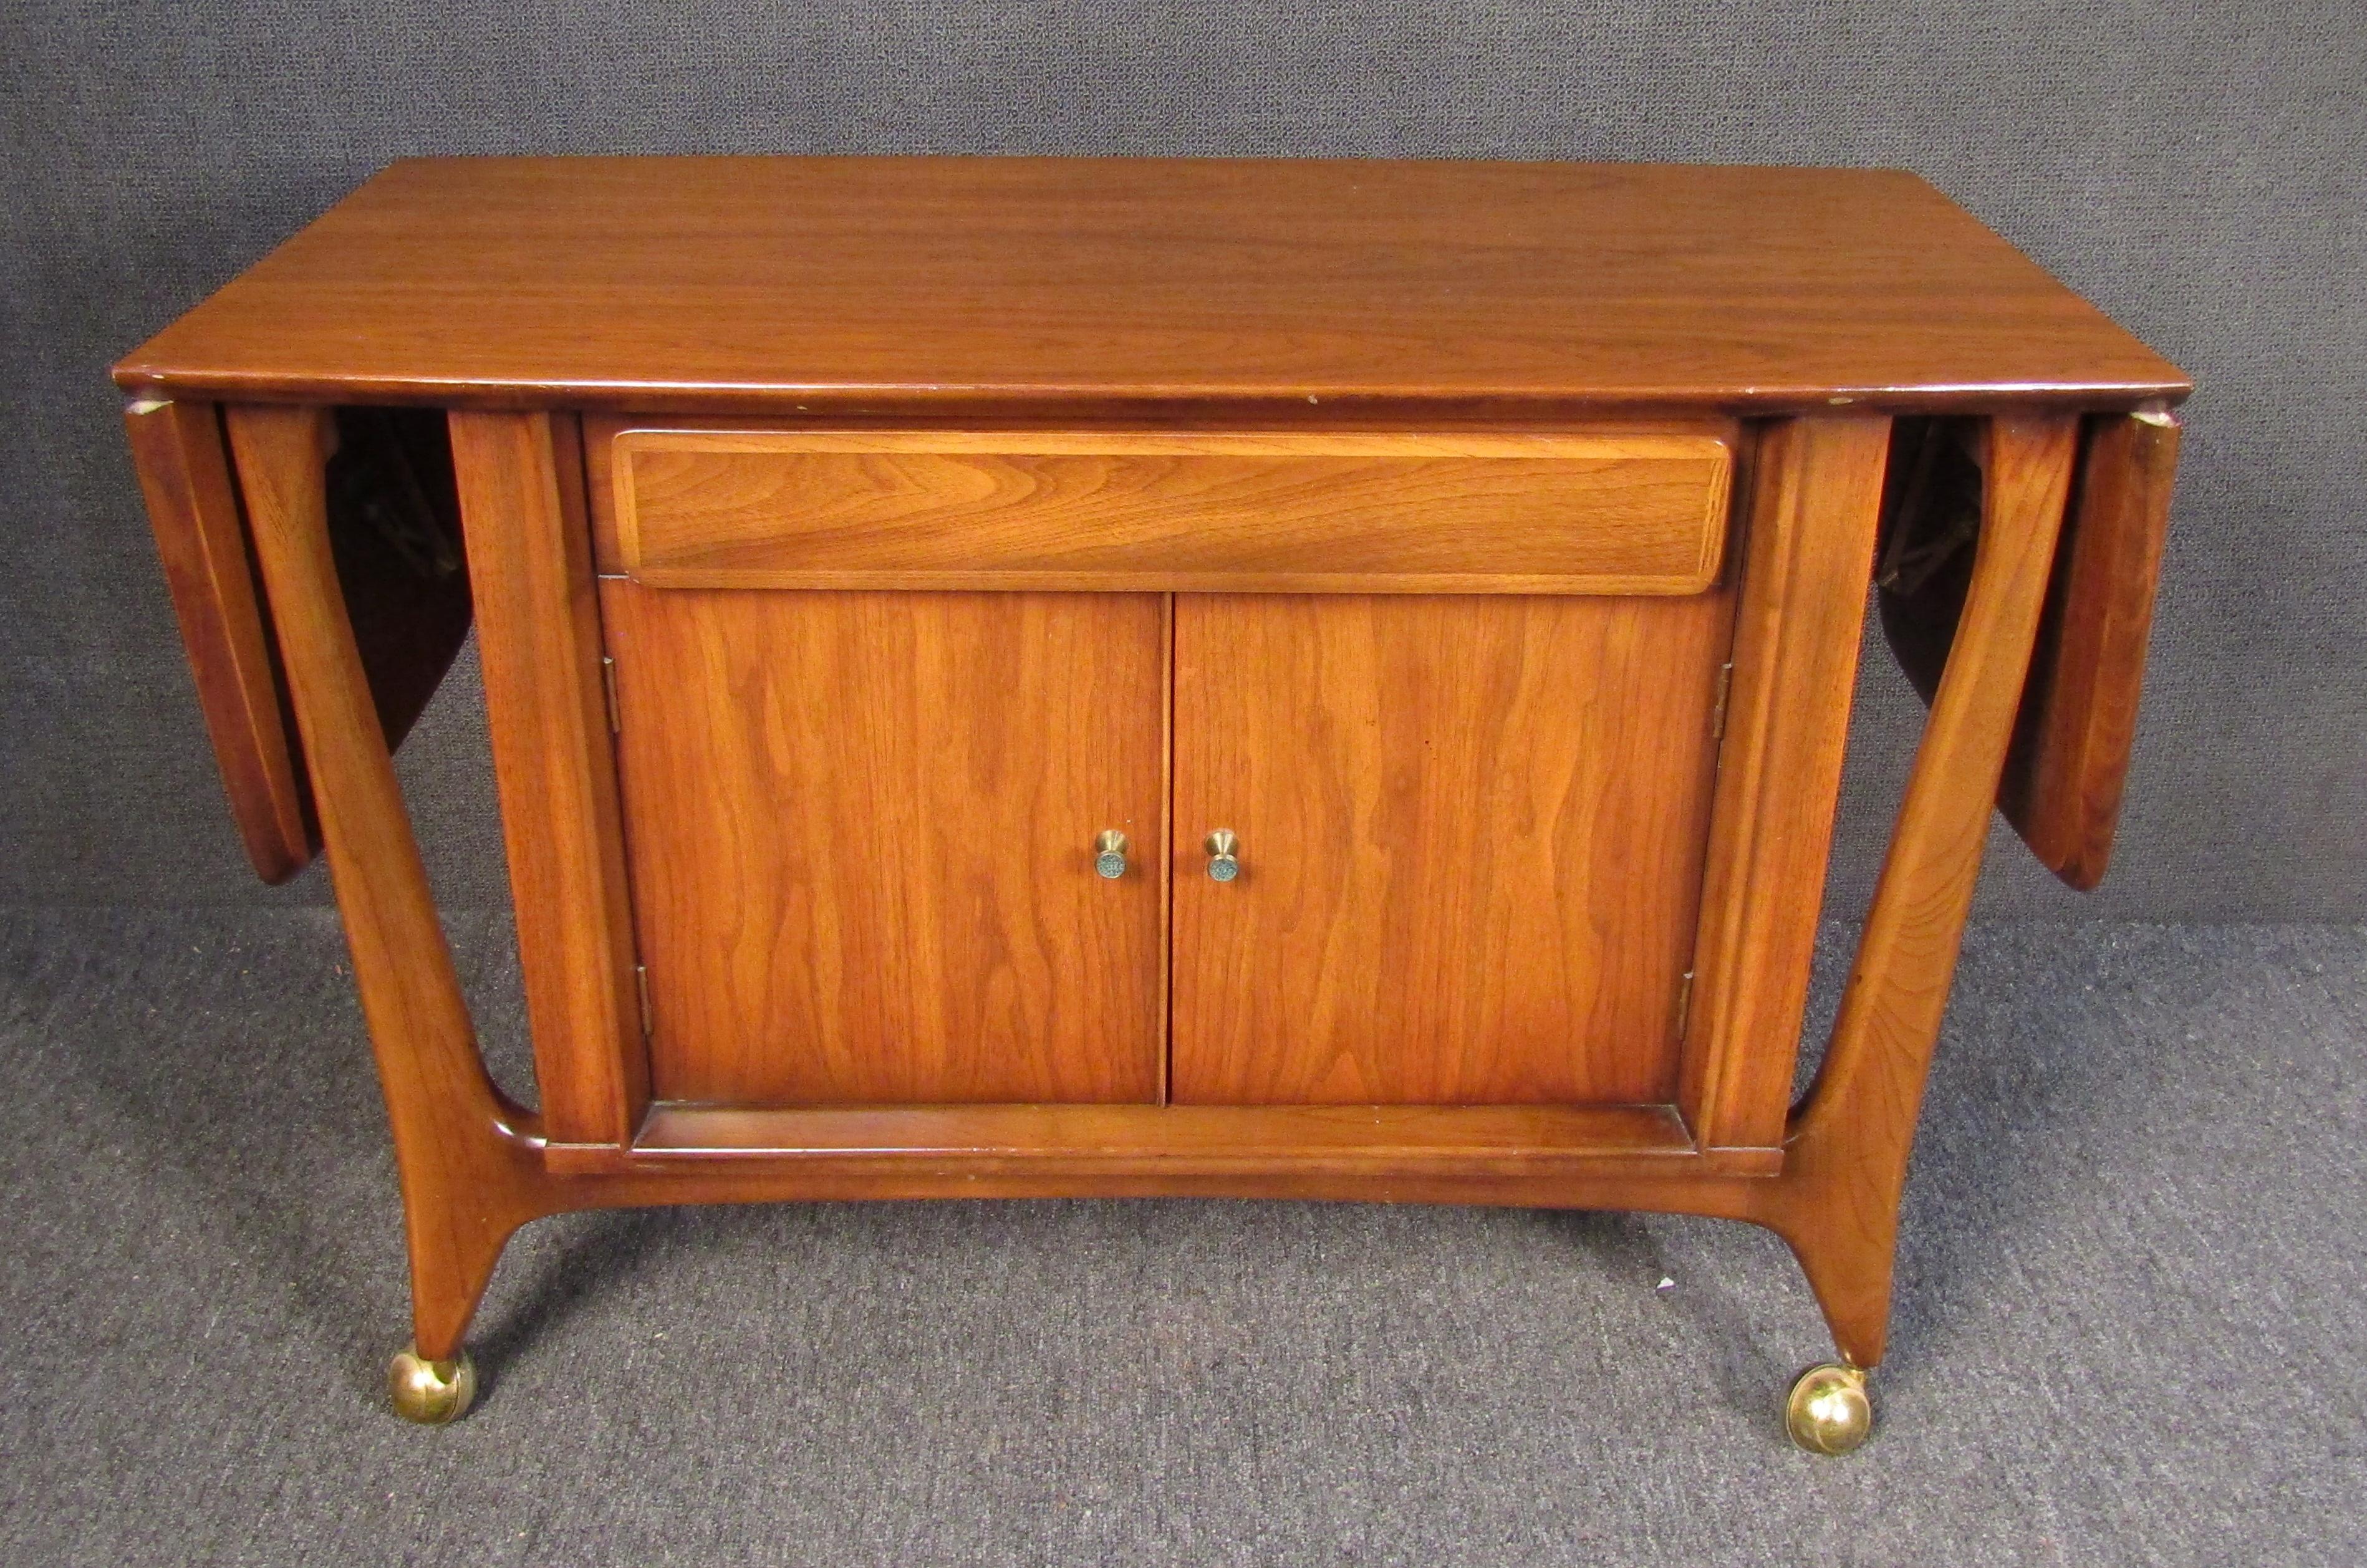 Mid-Century Modern console with dry bar interior. Extends 42-68